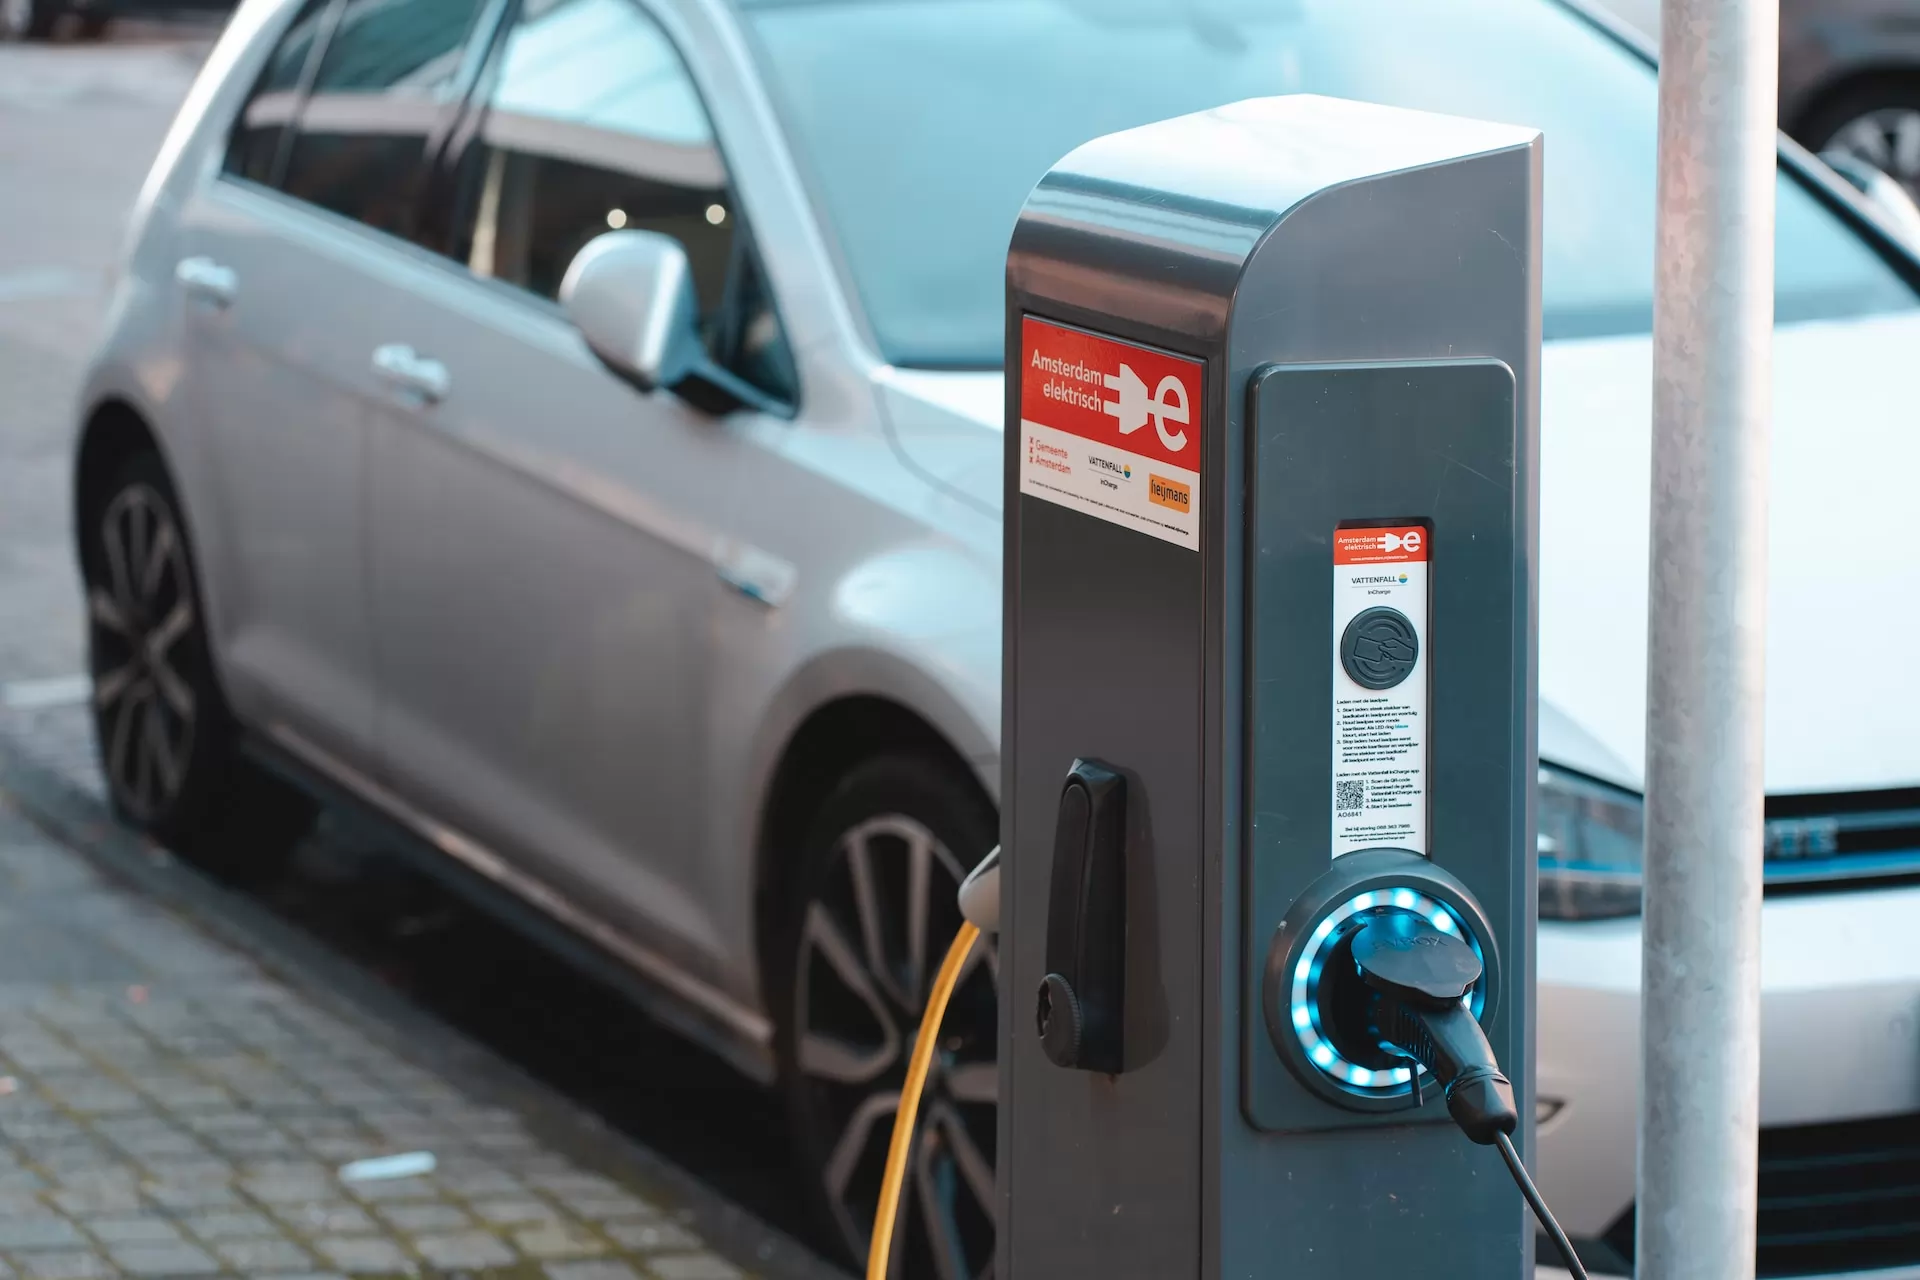 The electric charging station market